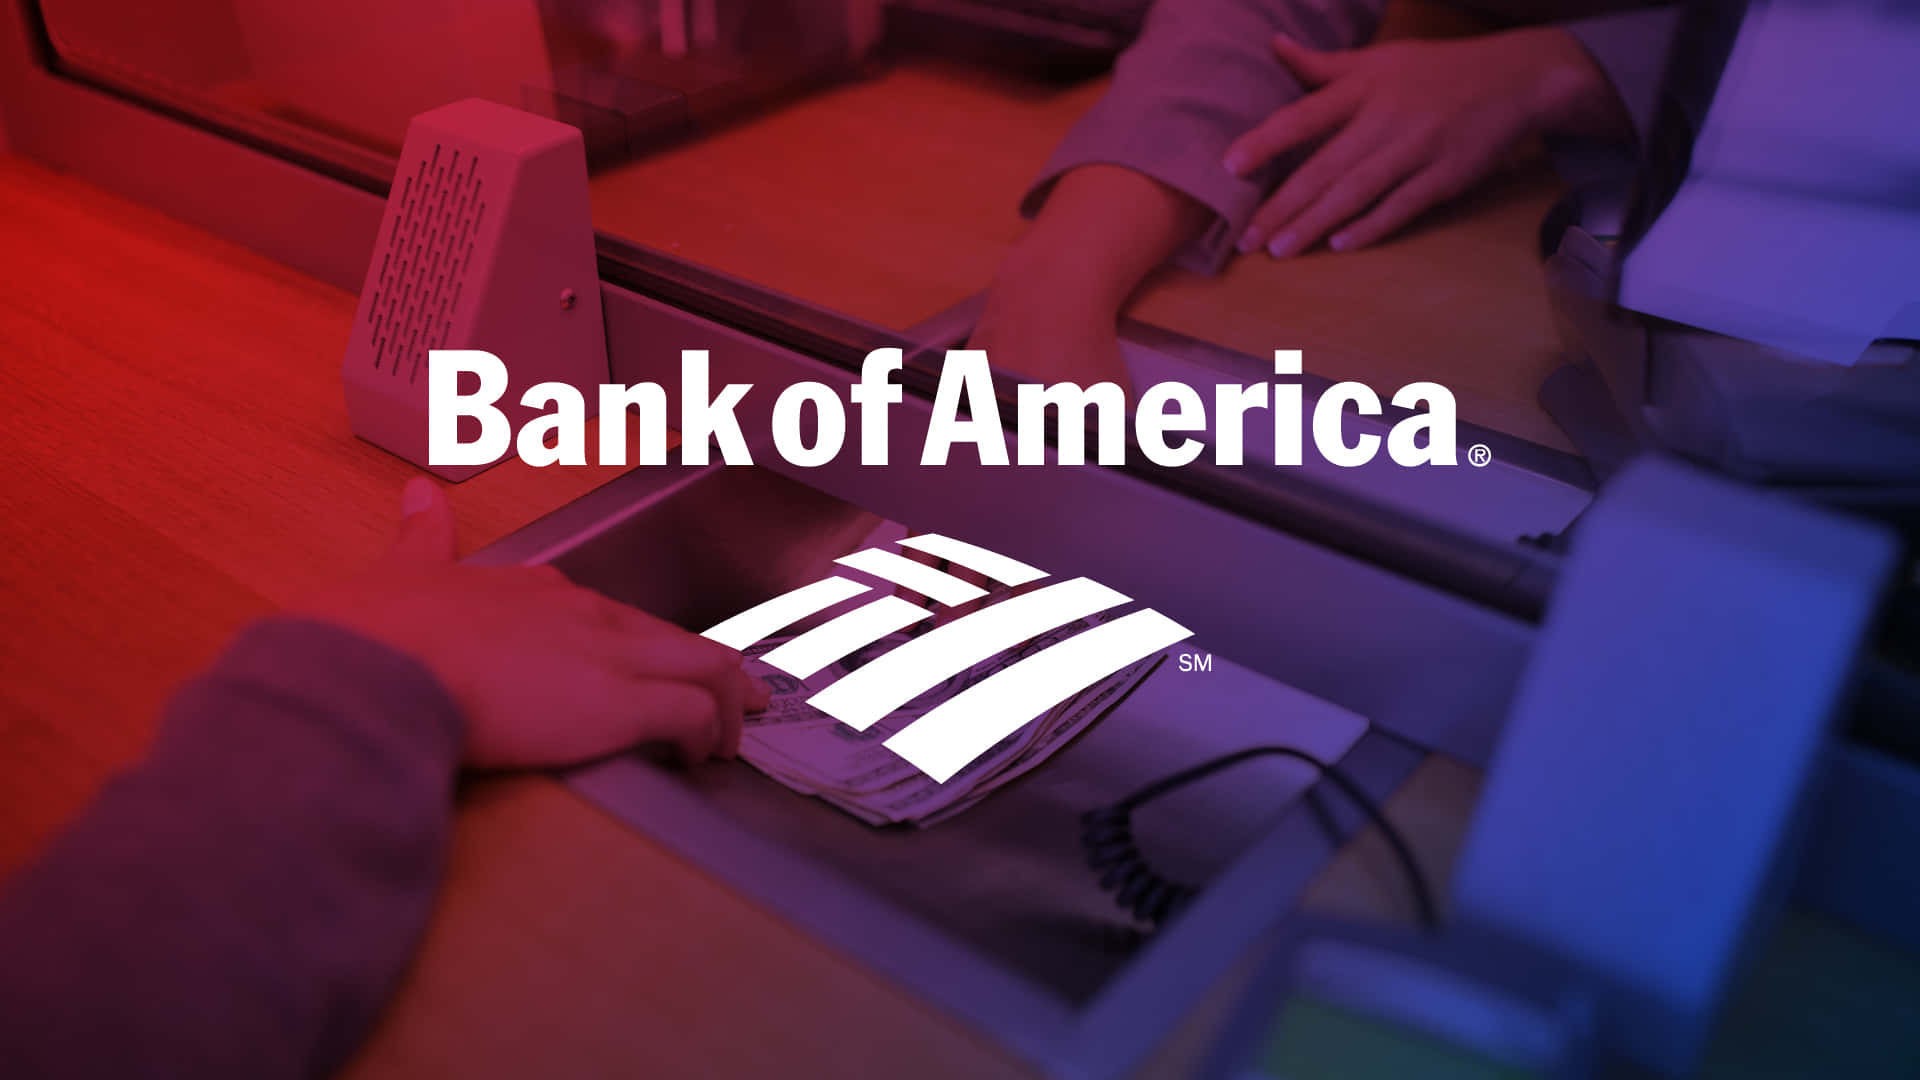 Bank of America: Convenience and Security